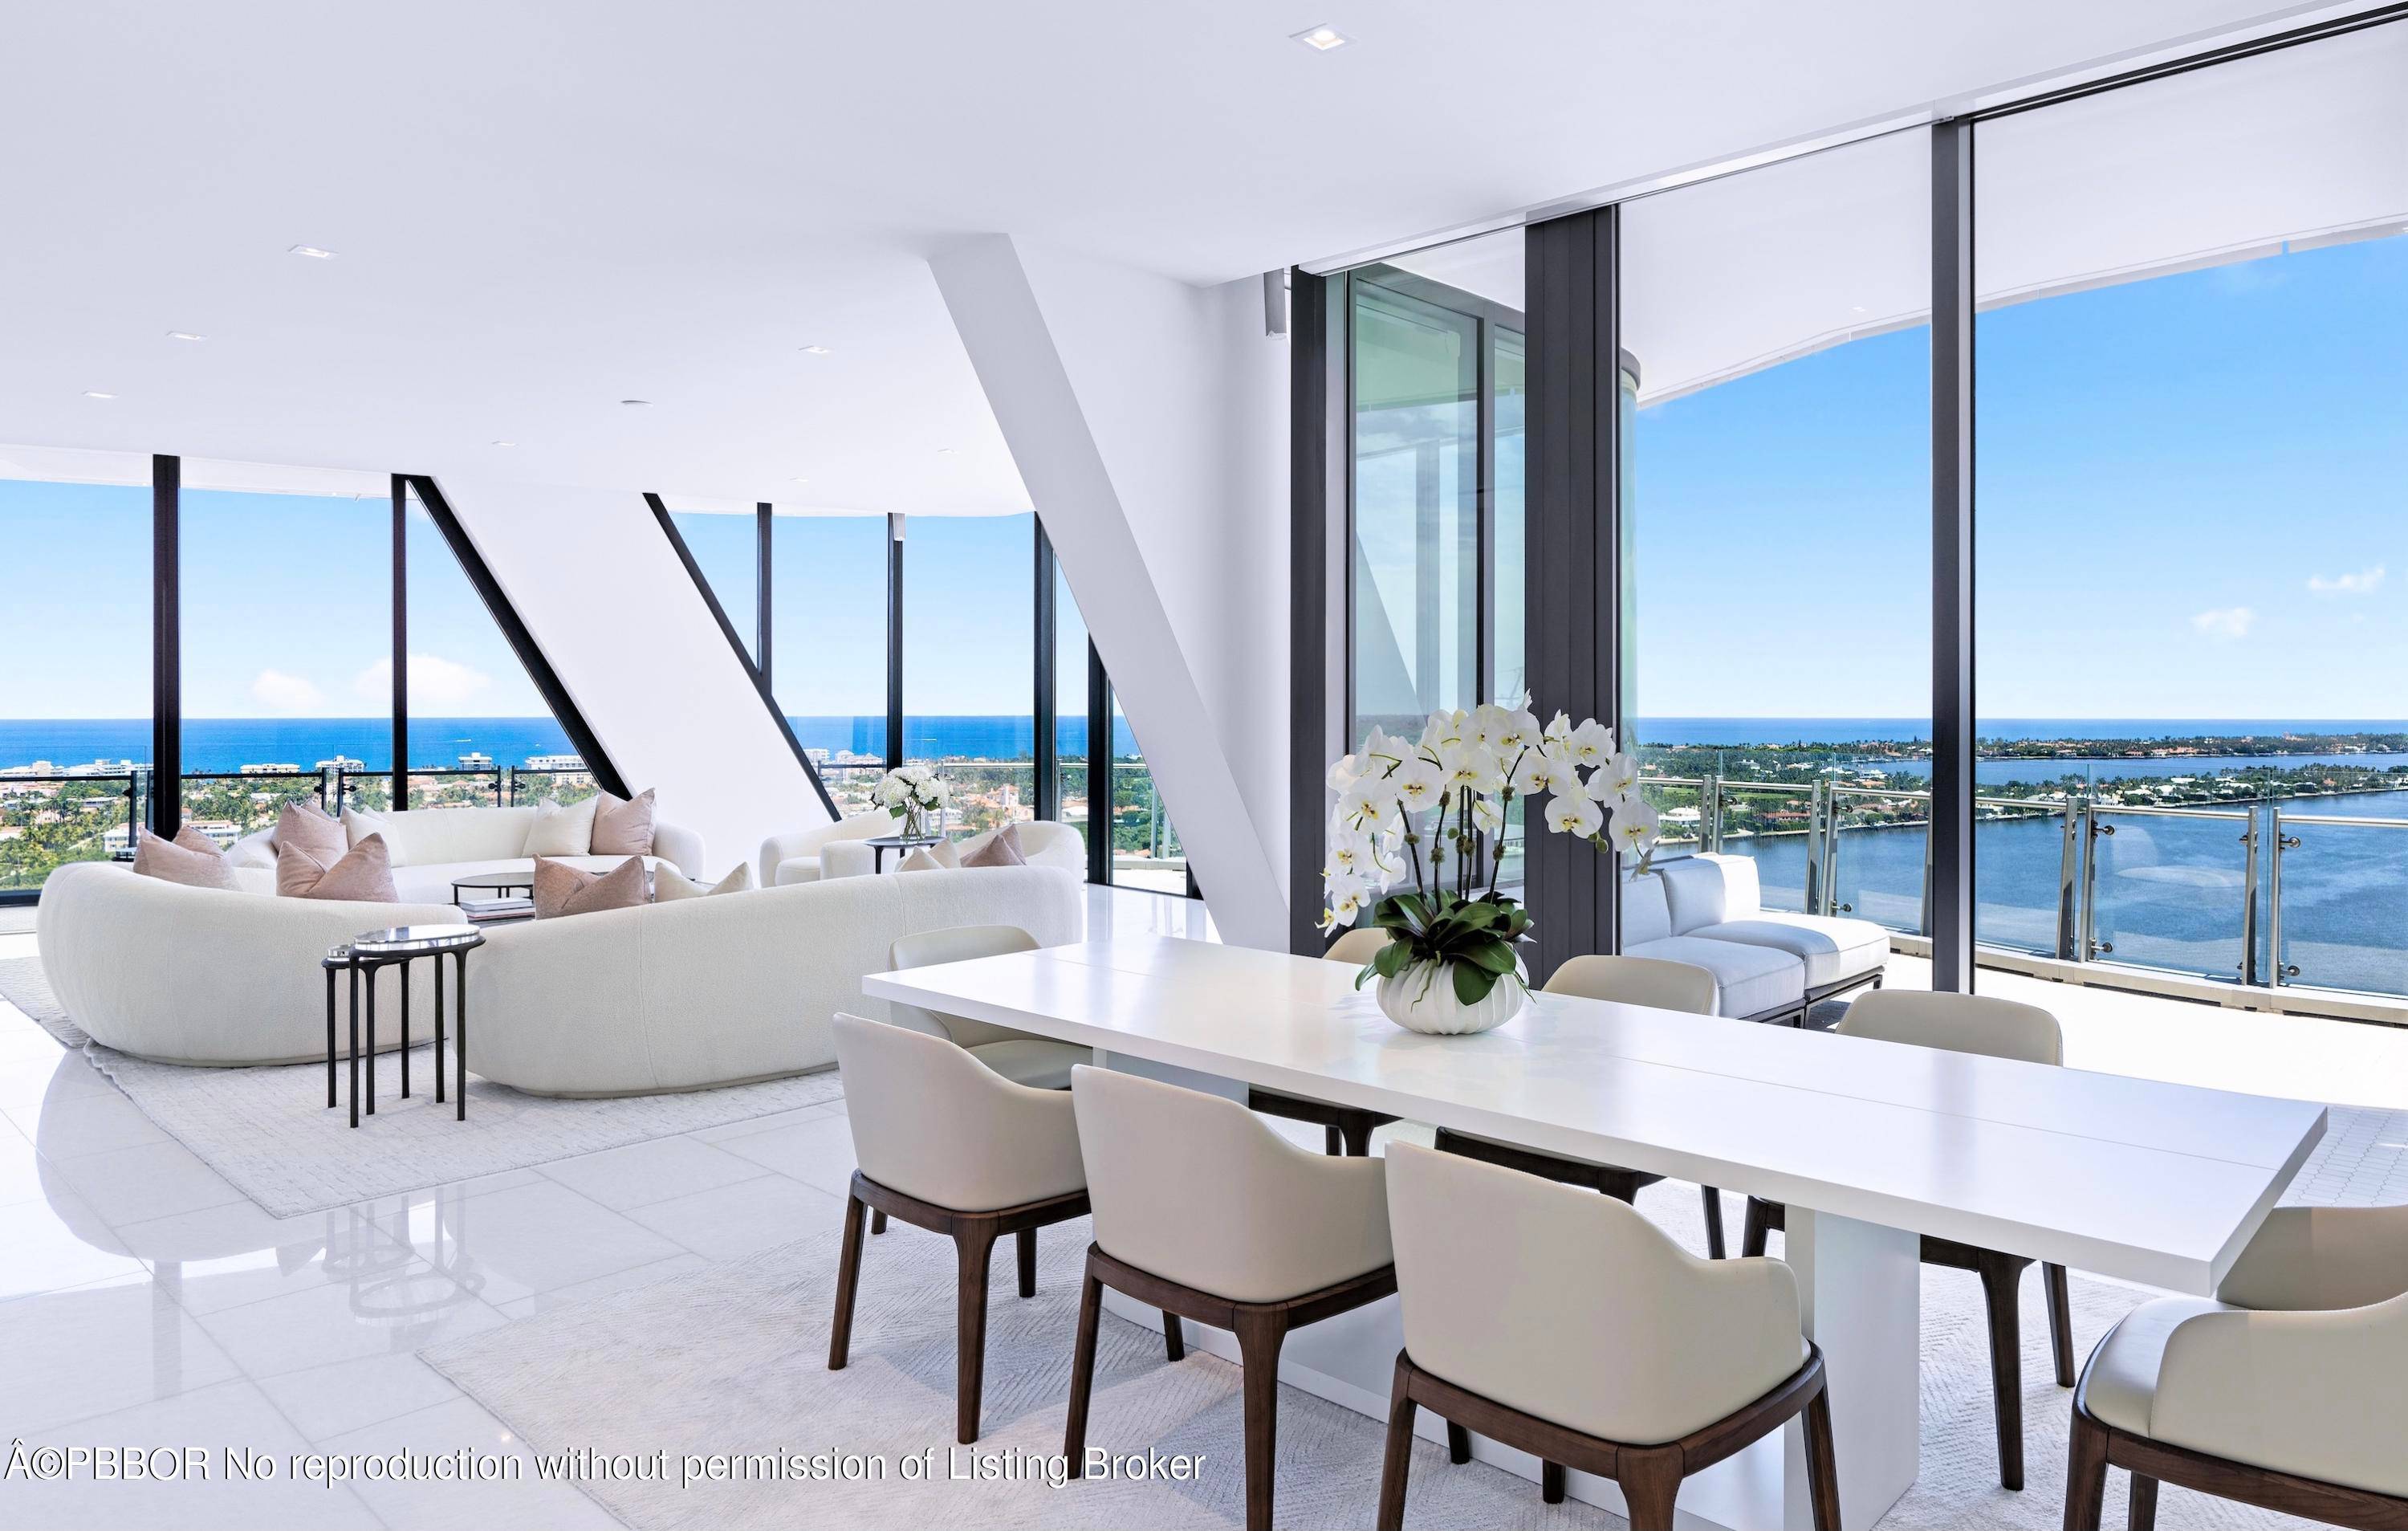 THE MOST MAGNIFICENT Impressive Panoramic Views are seen as soon as you step inside this one of a kind, ultra luxury SE corner residence at The Bristol.